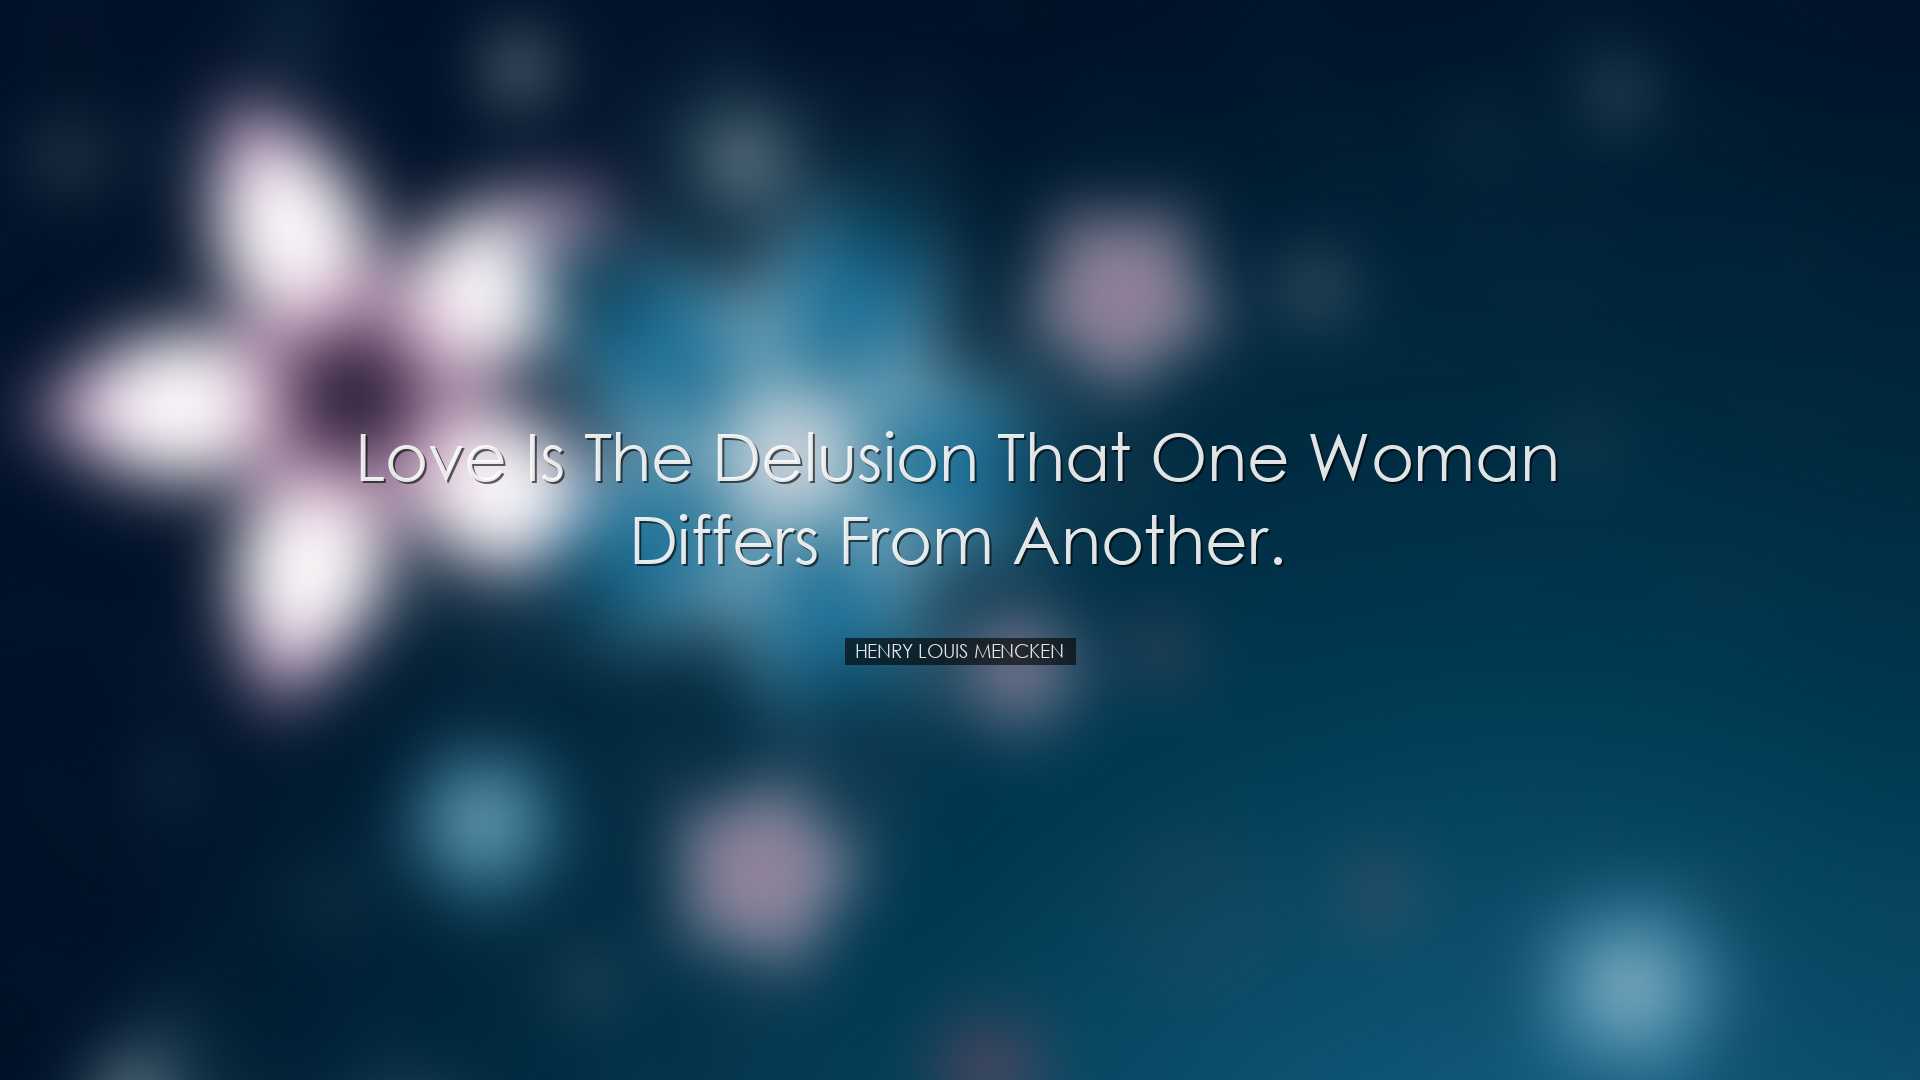 Love is the delusion that one woman differs from another. - Henry